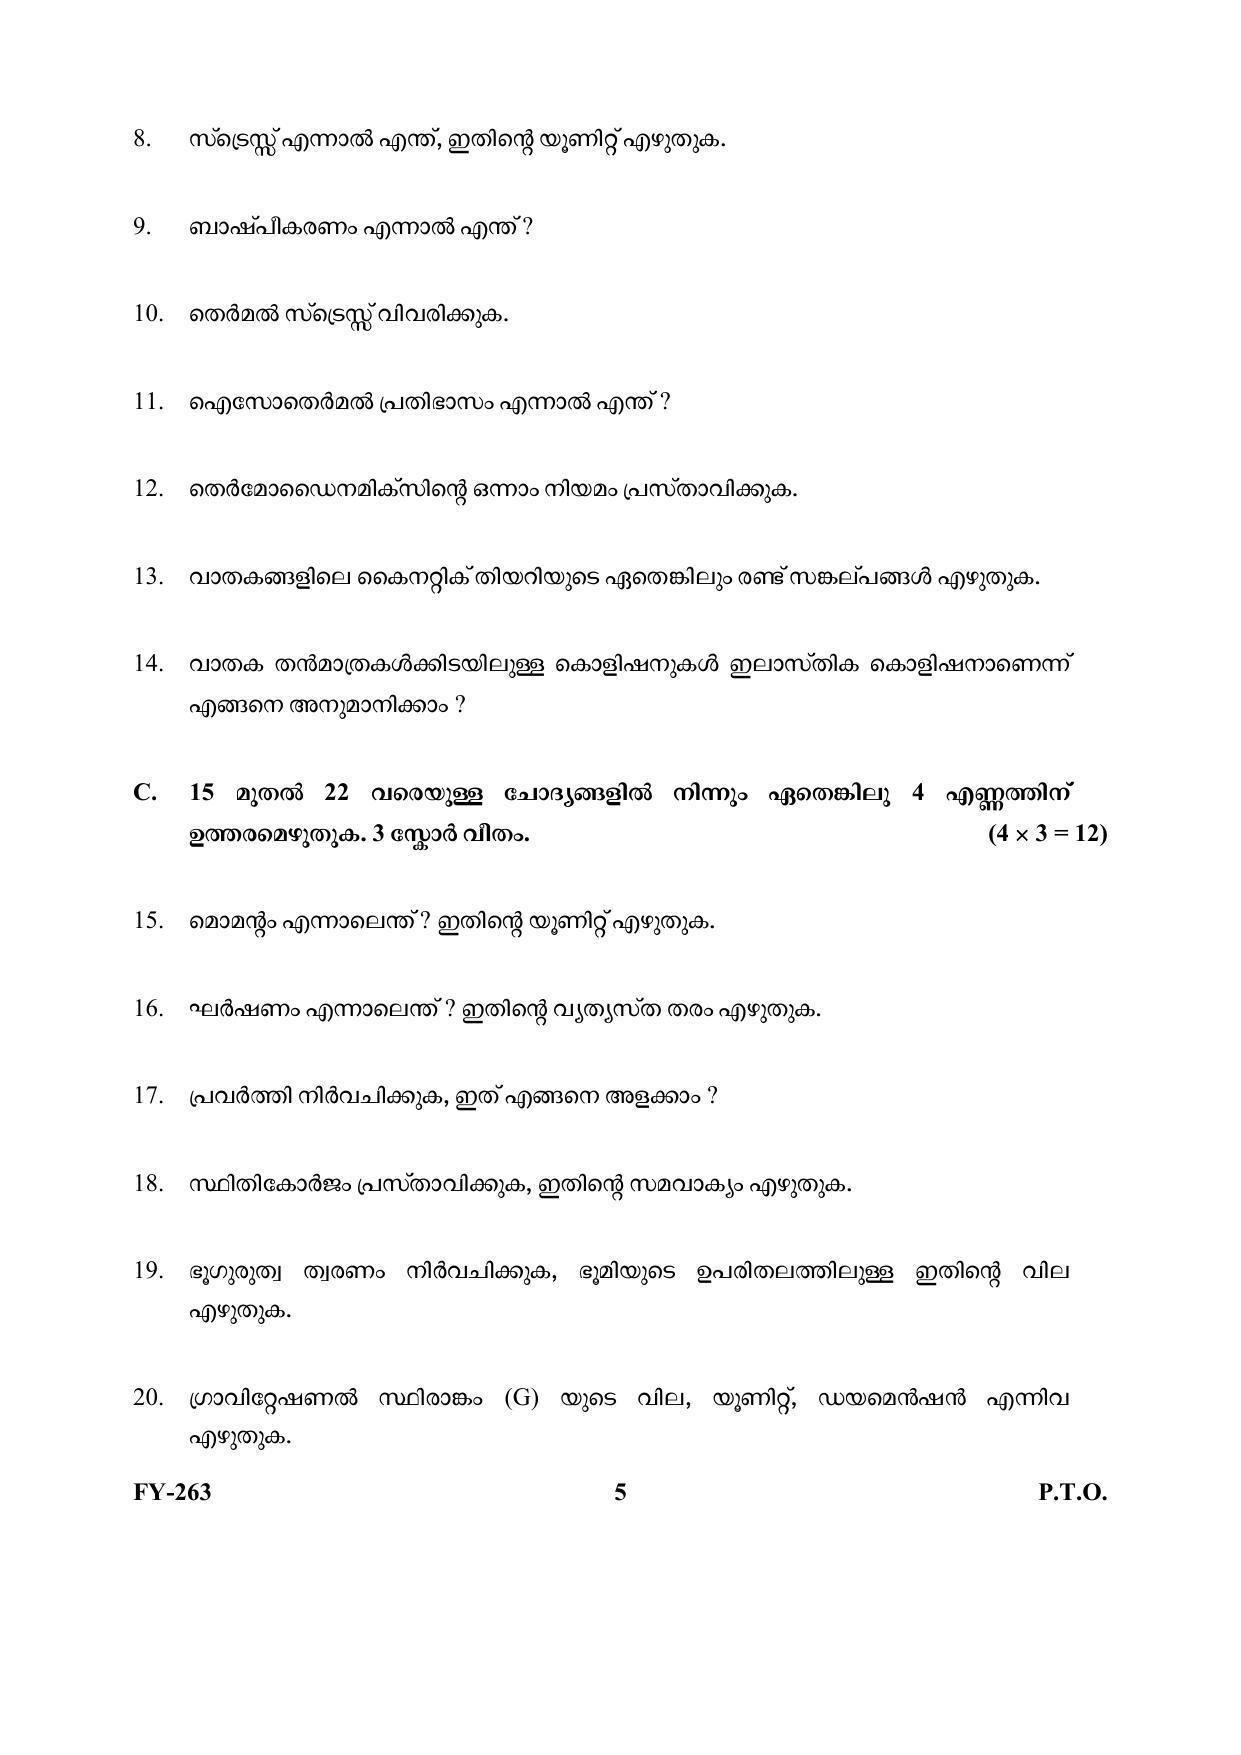 Kerala Plus One (Class 11th) Physics (Hearing Impaired) Question Paper 2021 - Page 5